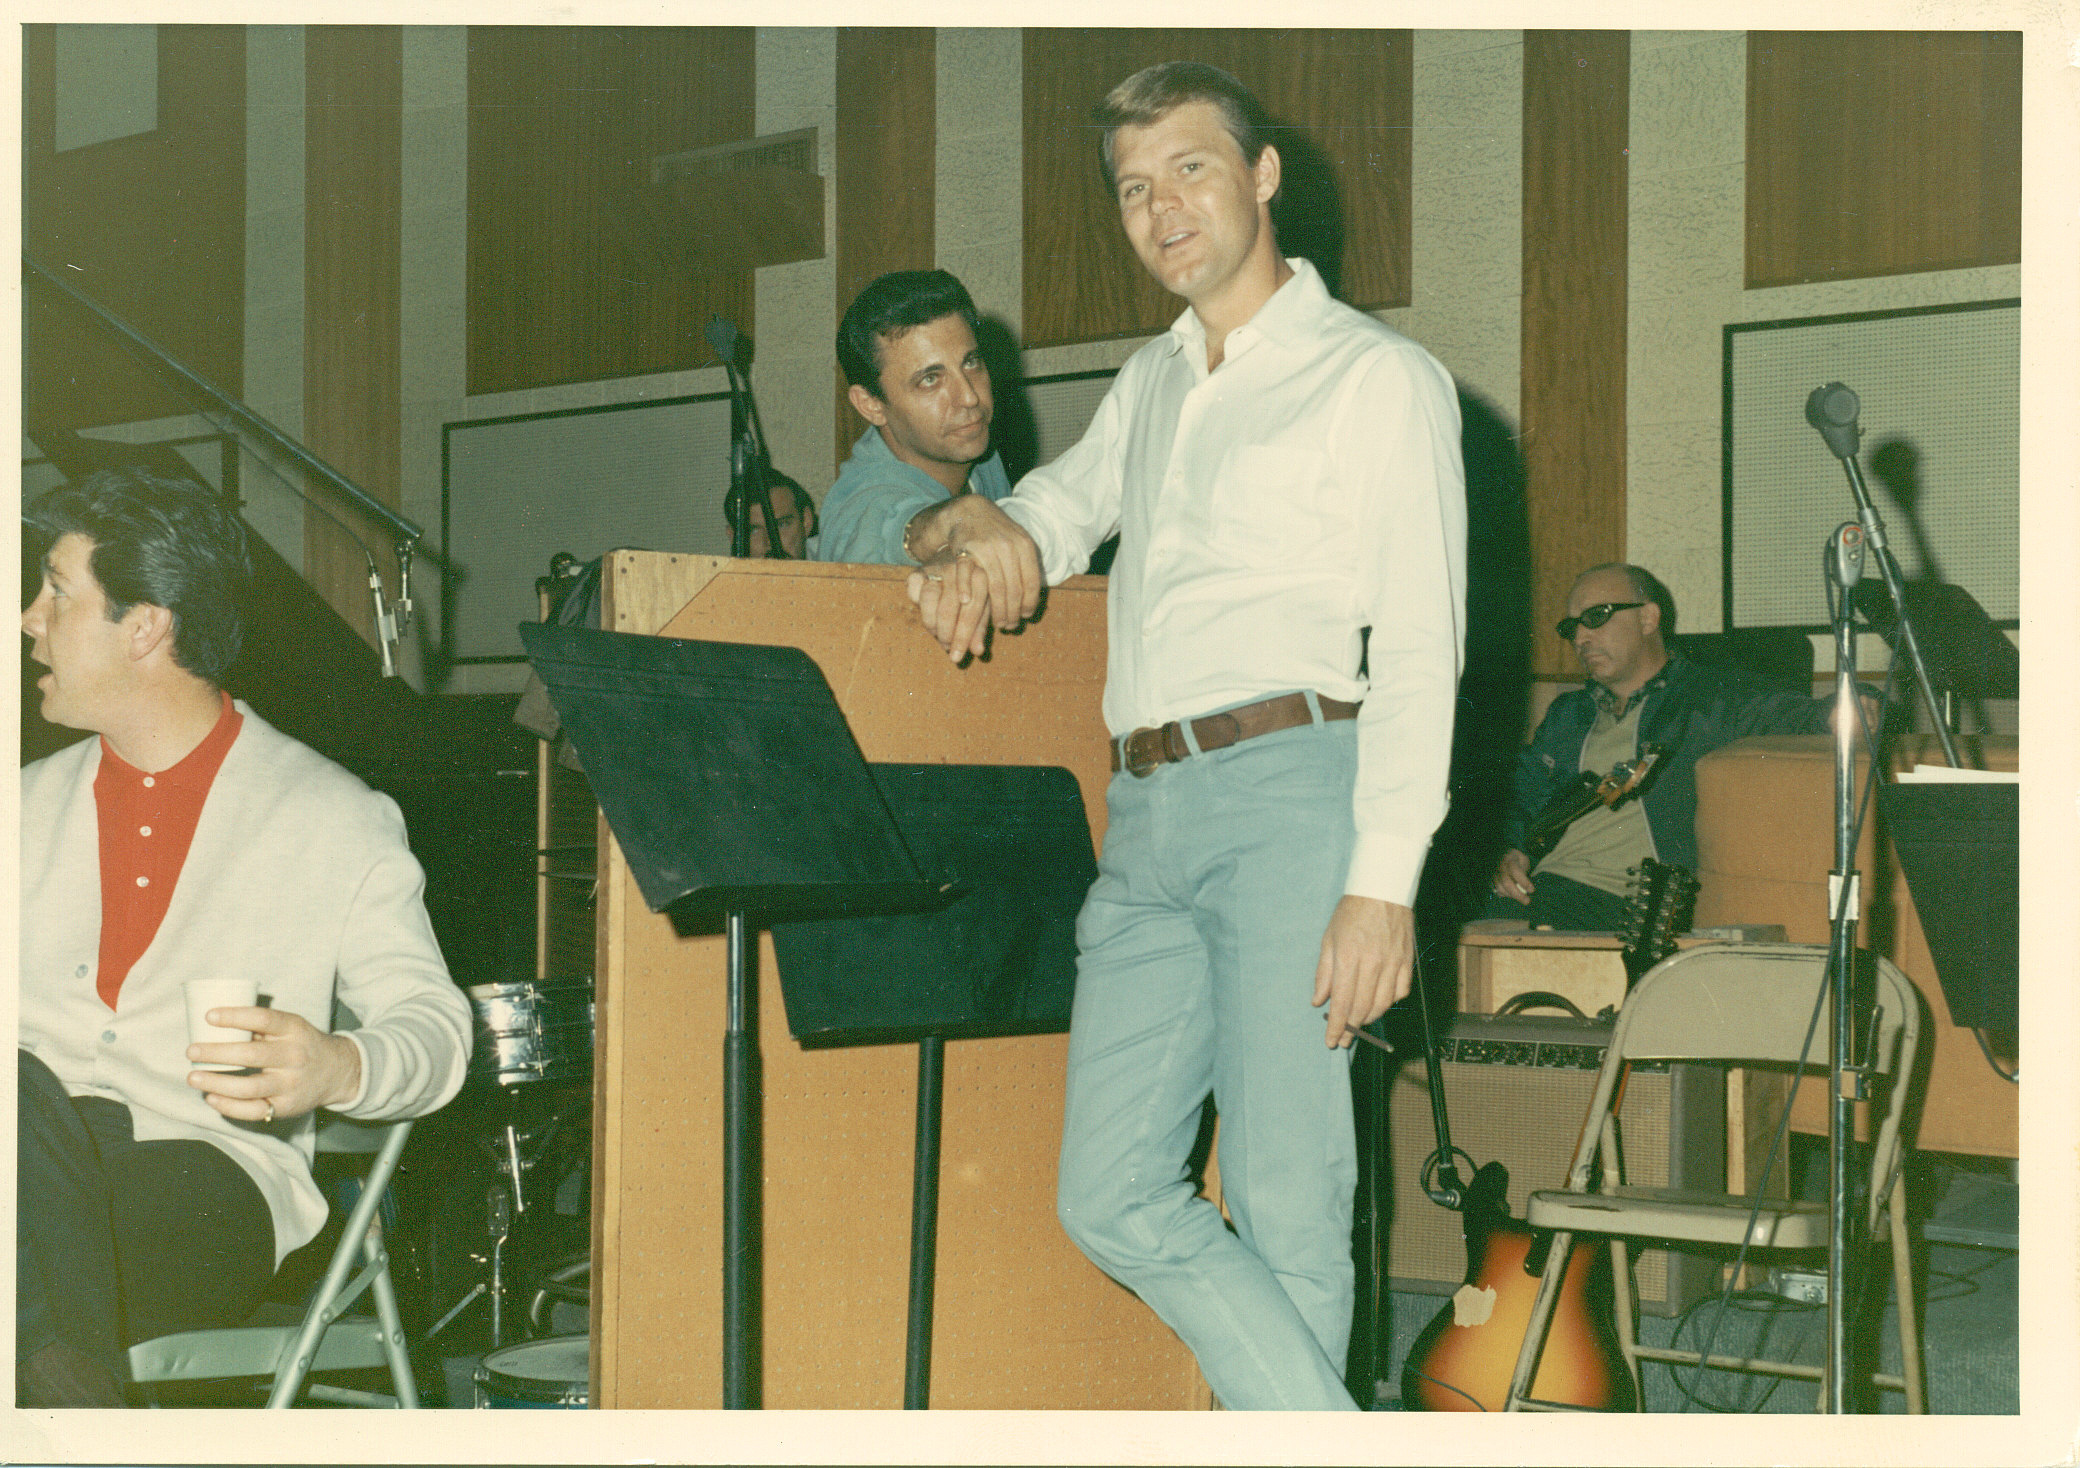 Glen Campbell and Hal Blaine in THE WRECKING CREW, a Magnolia Pictures release. Photo courtesy of Magnolia Pictures.